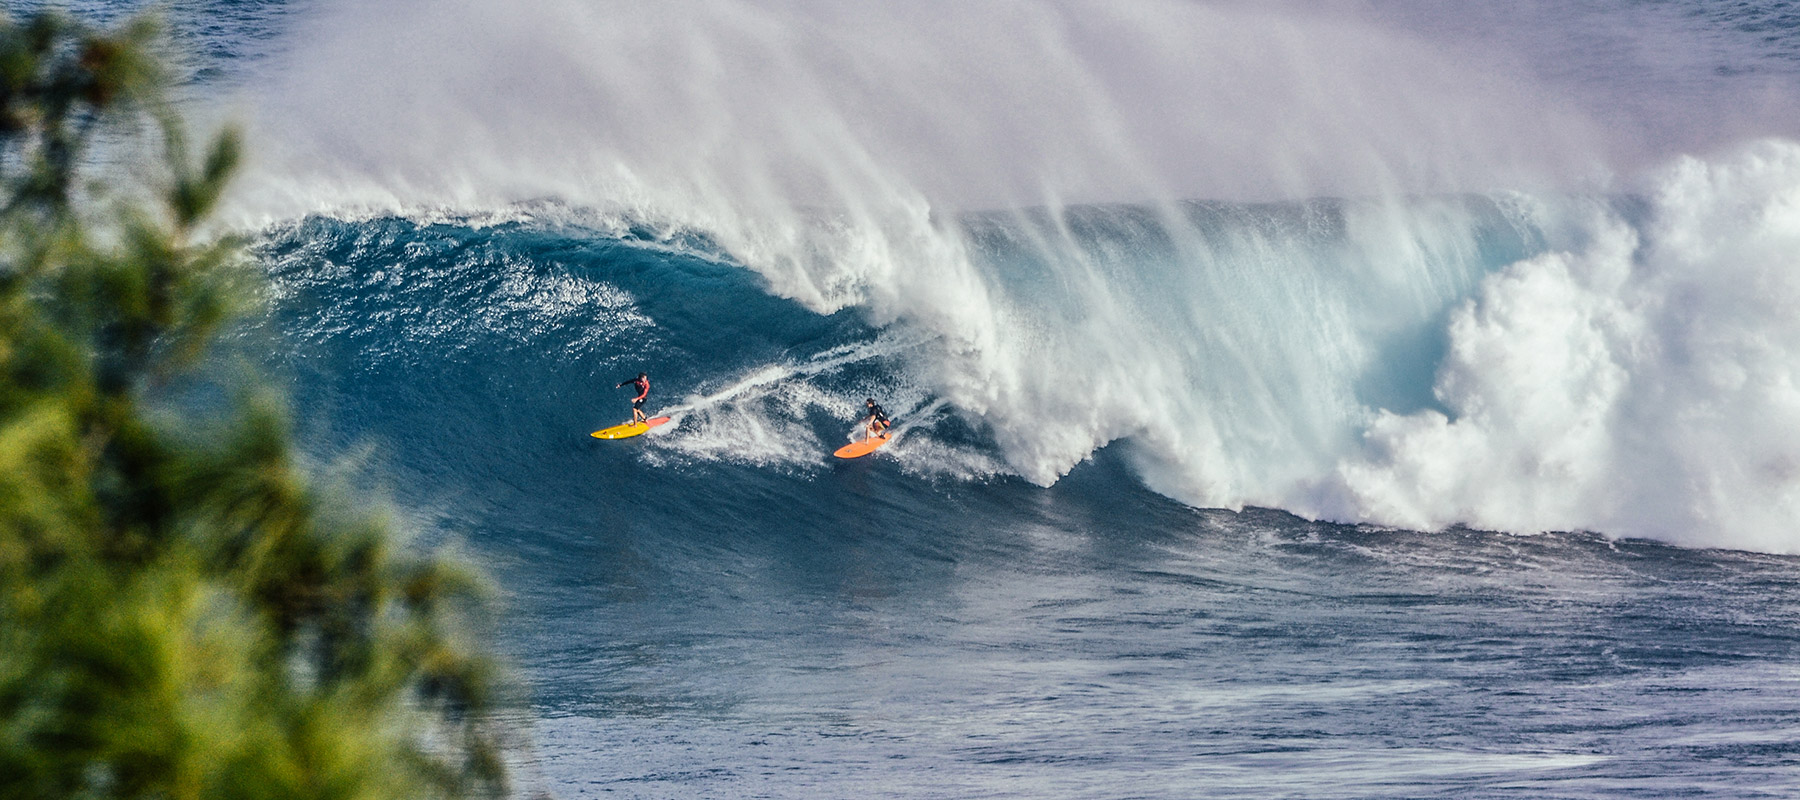 Perfection and chaos: massive swell hits Oahu's outer reefs